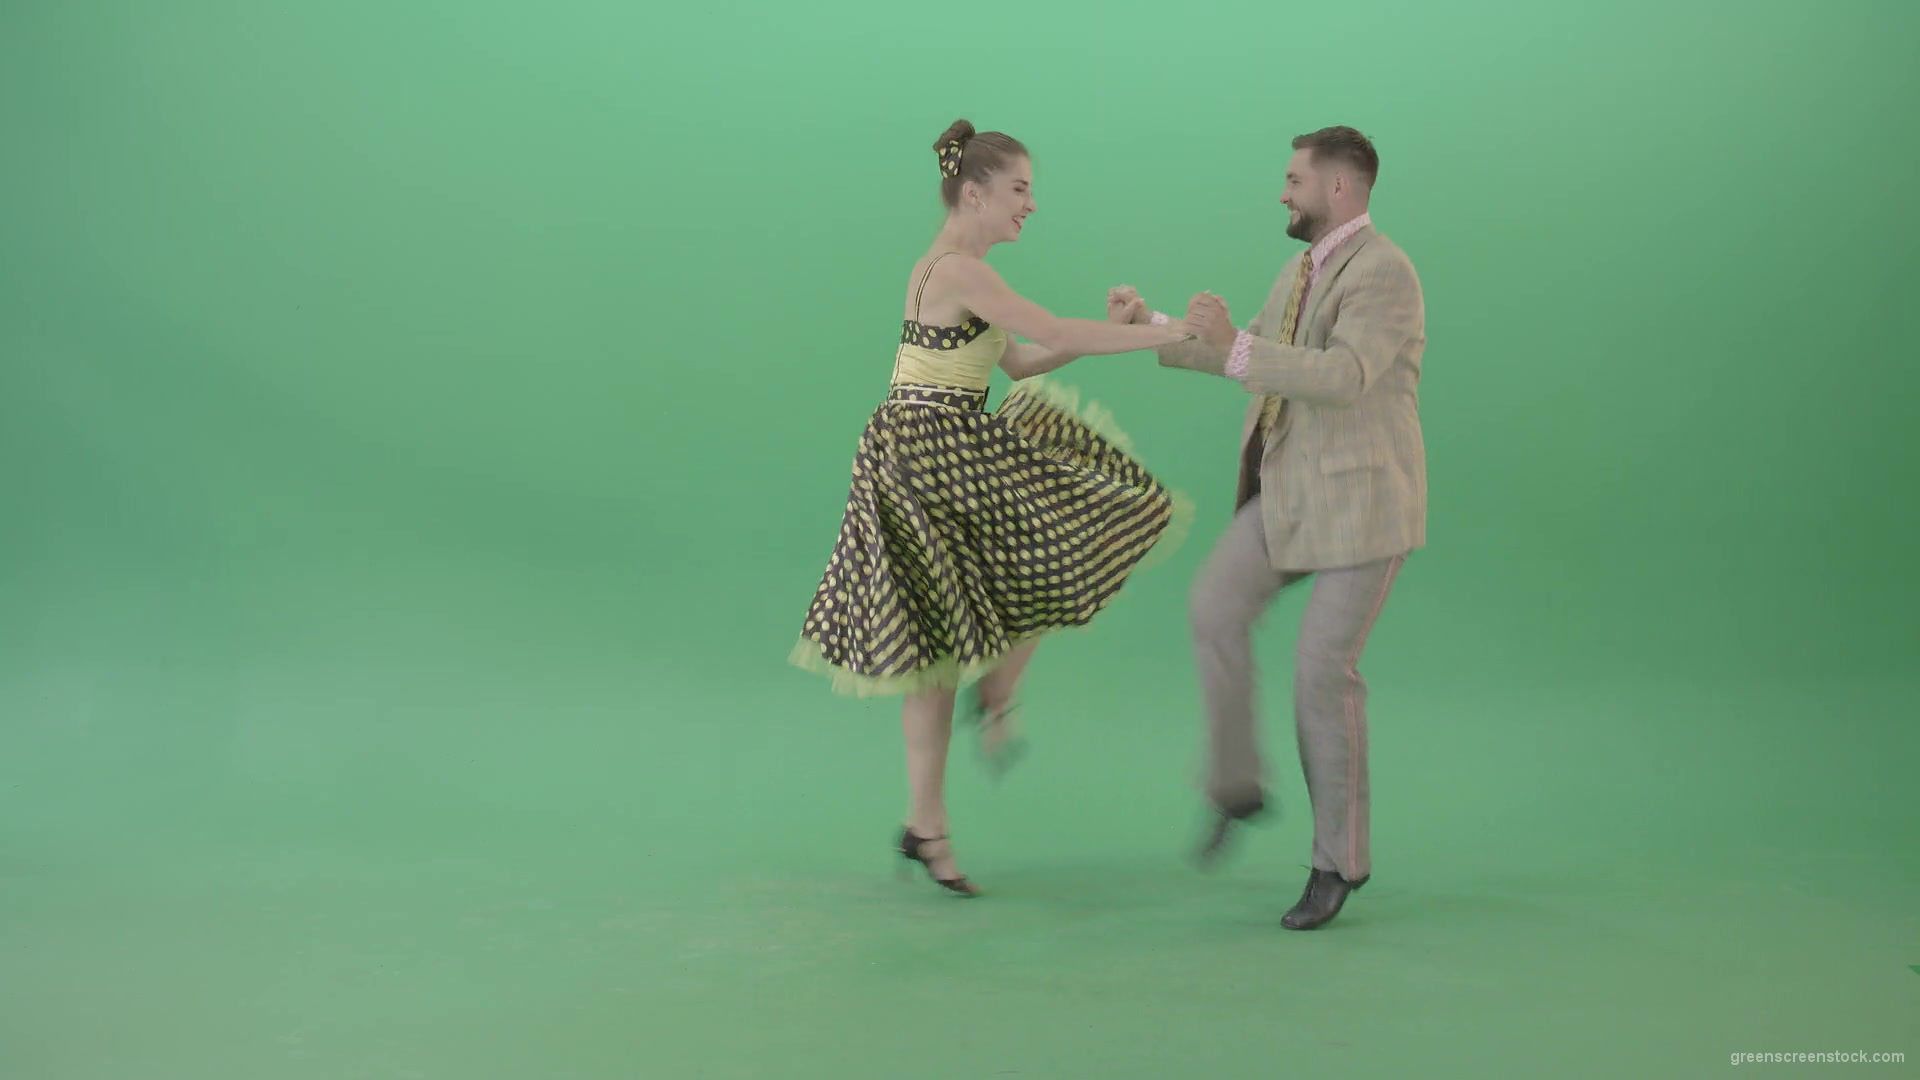 Lovely-couple-jumping-in-Boogie-woogie-dance-isolated-on-Green-Screen-4K-Video-Stock-Footage-1920_004 Green Screen Stock